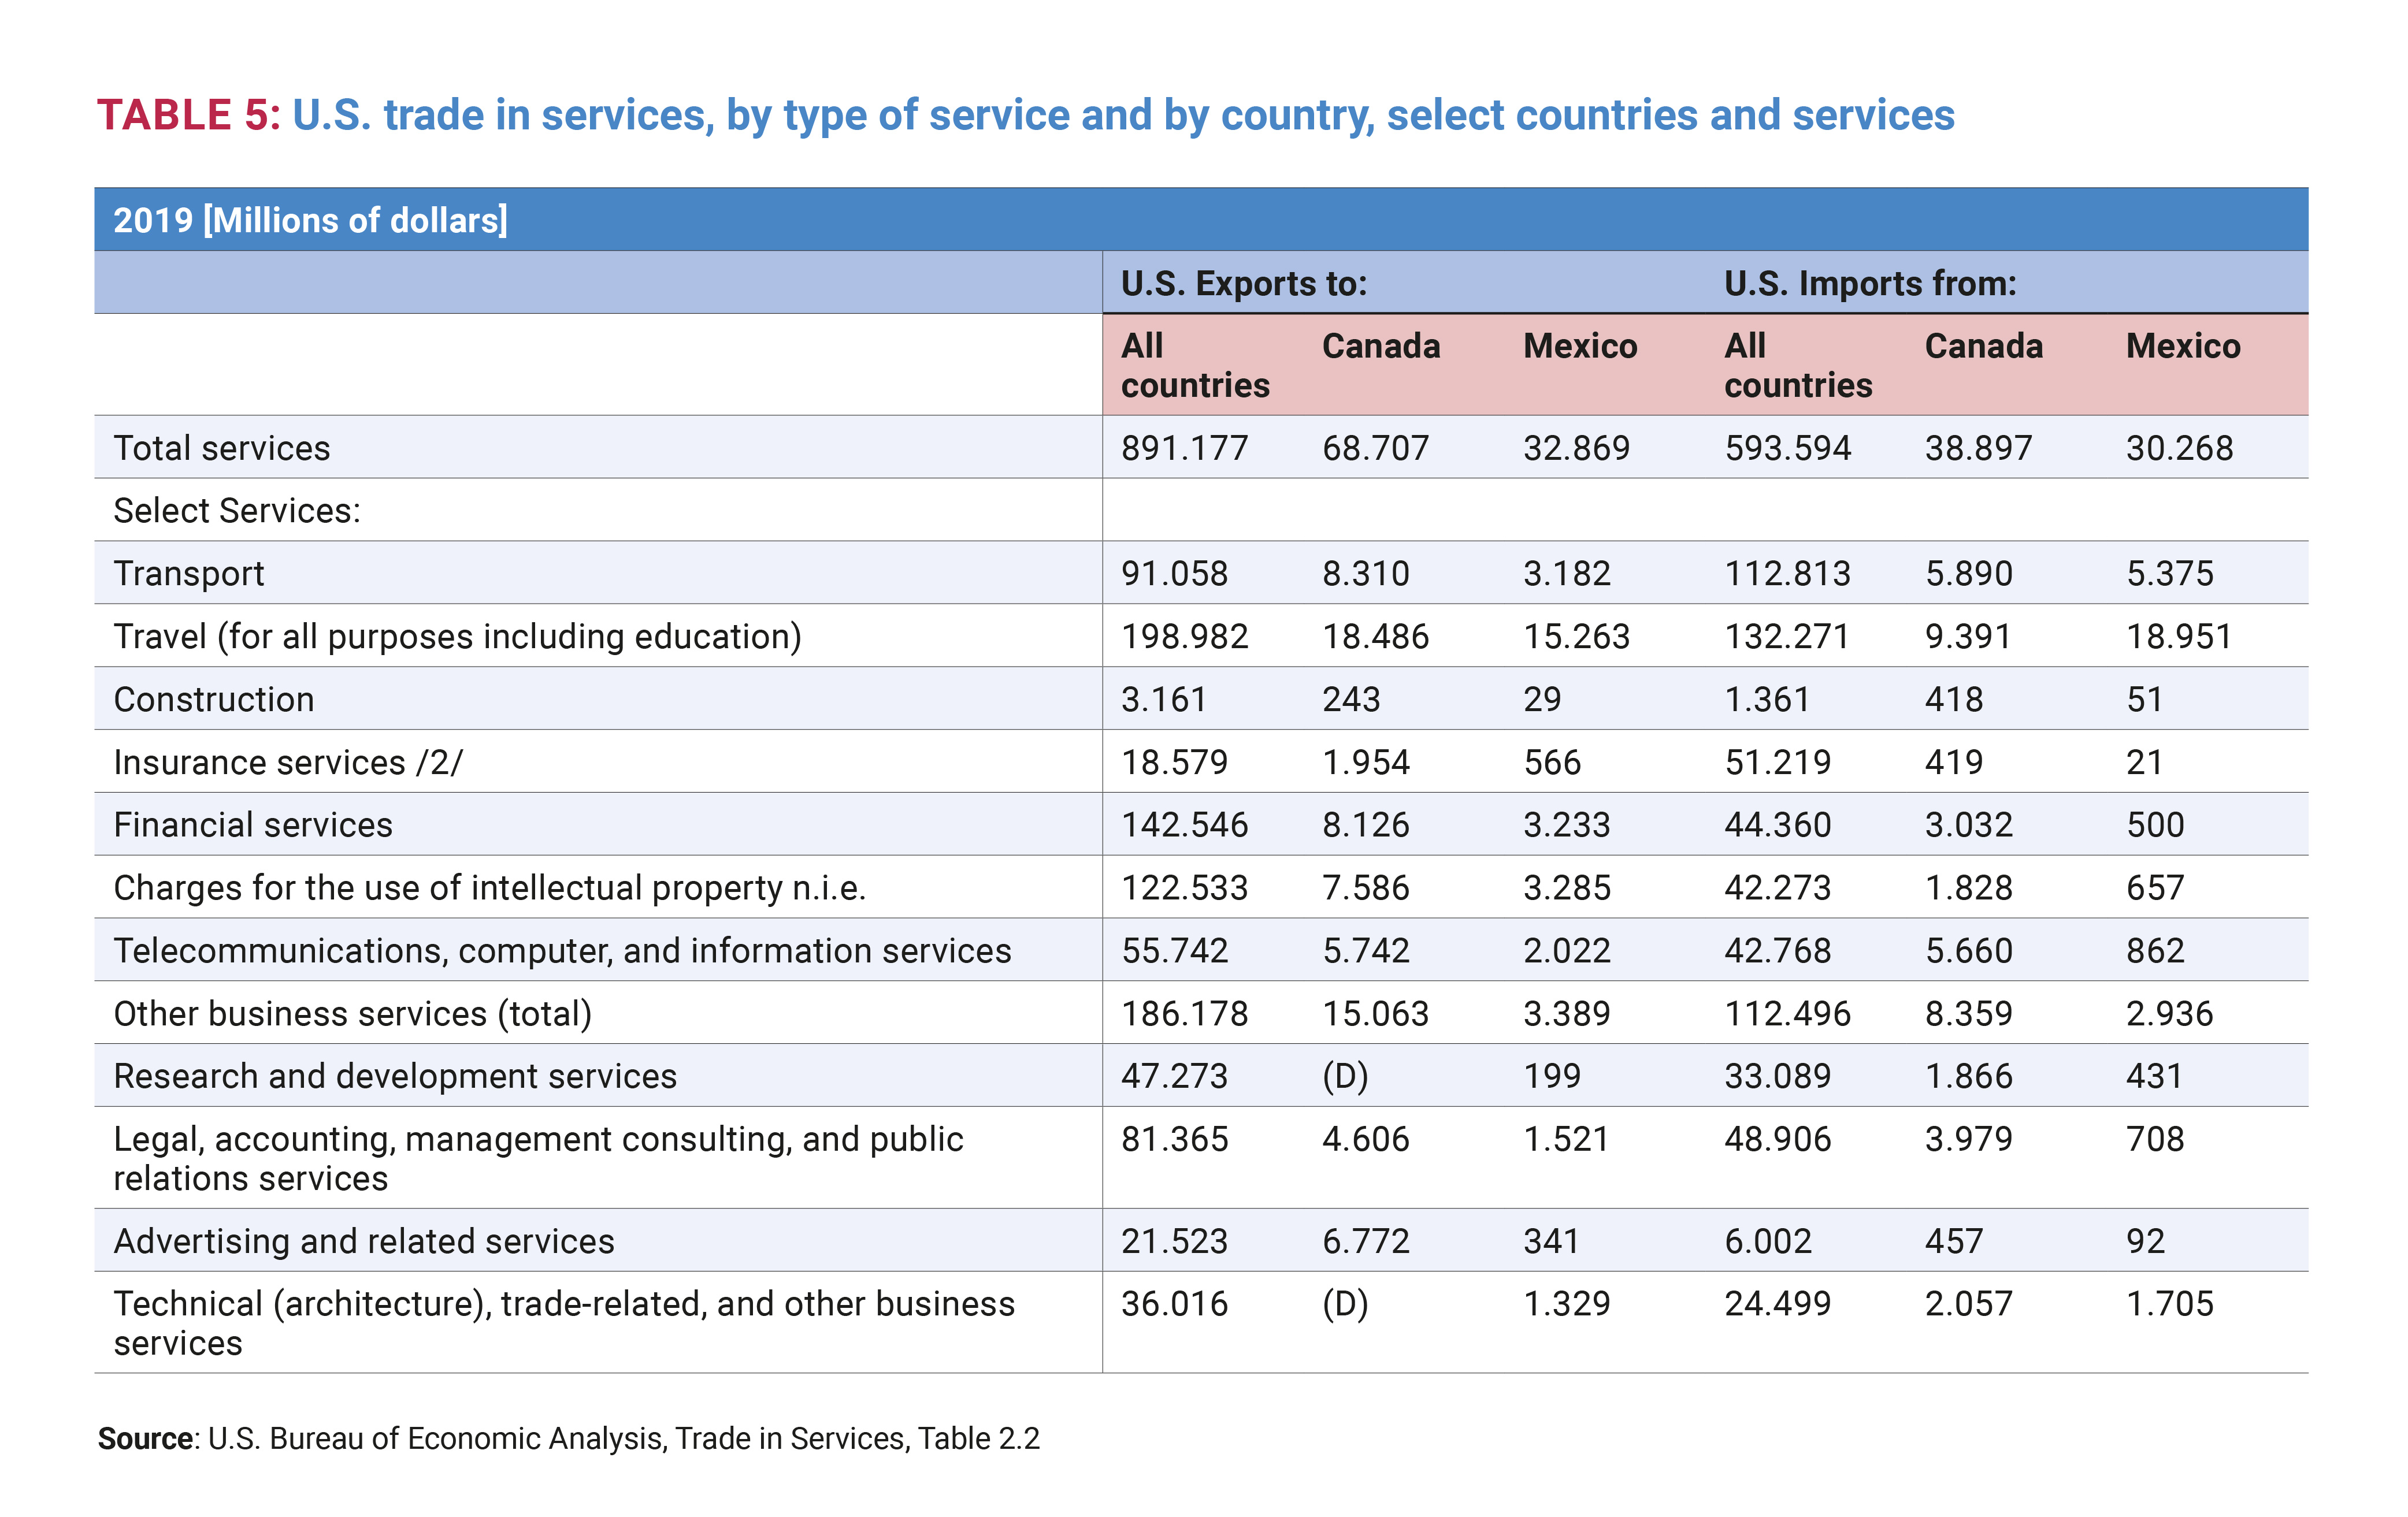 U.S. trade in services, by type of service and by country, select countries and services